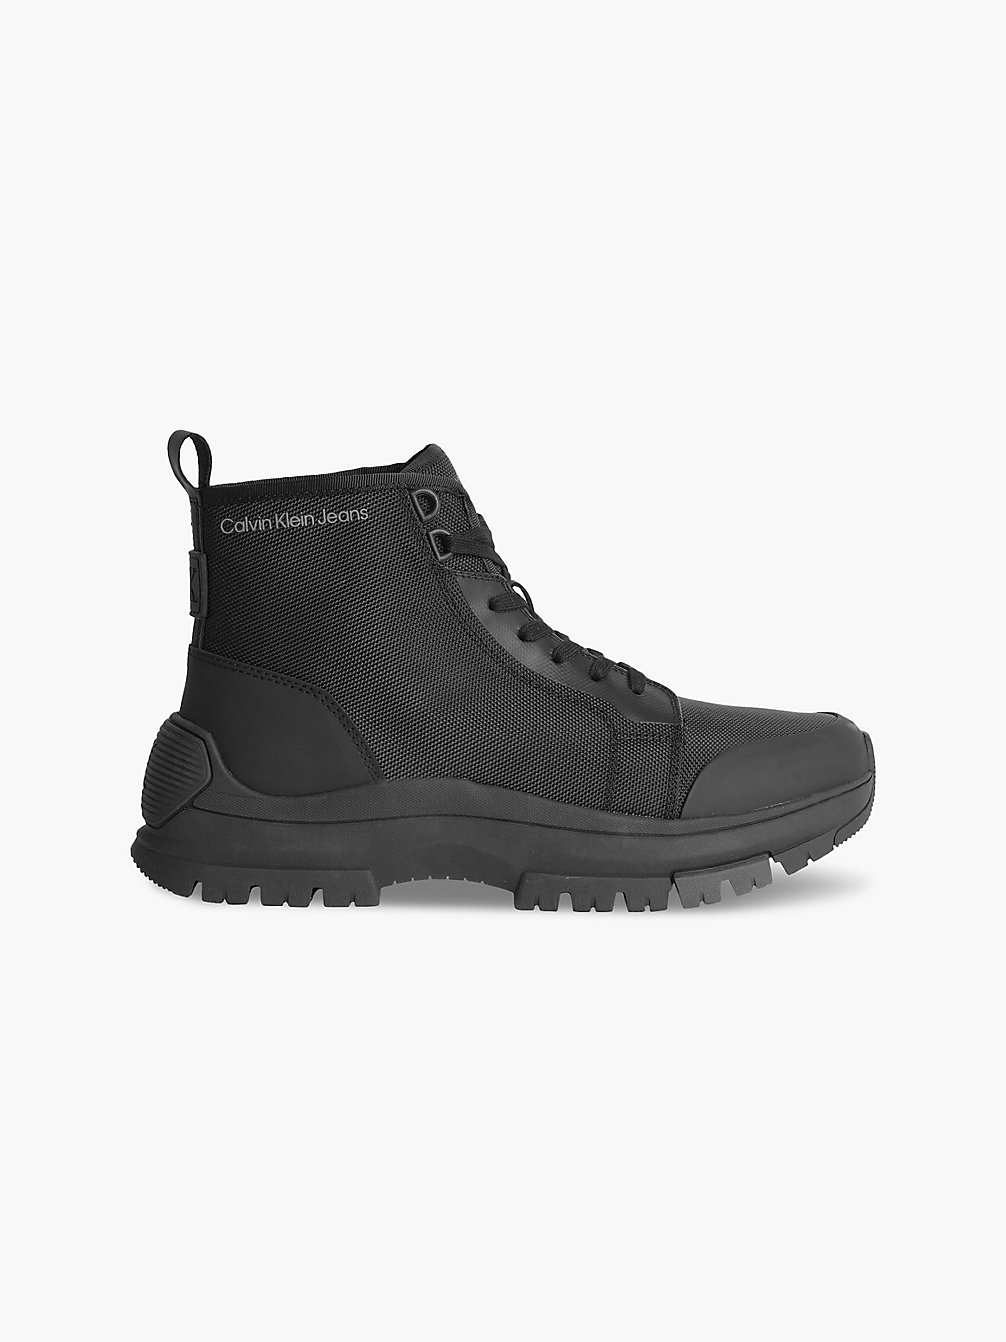 BLACK Recycled Hybrid Boots undefined men Calvin Klein